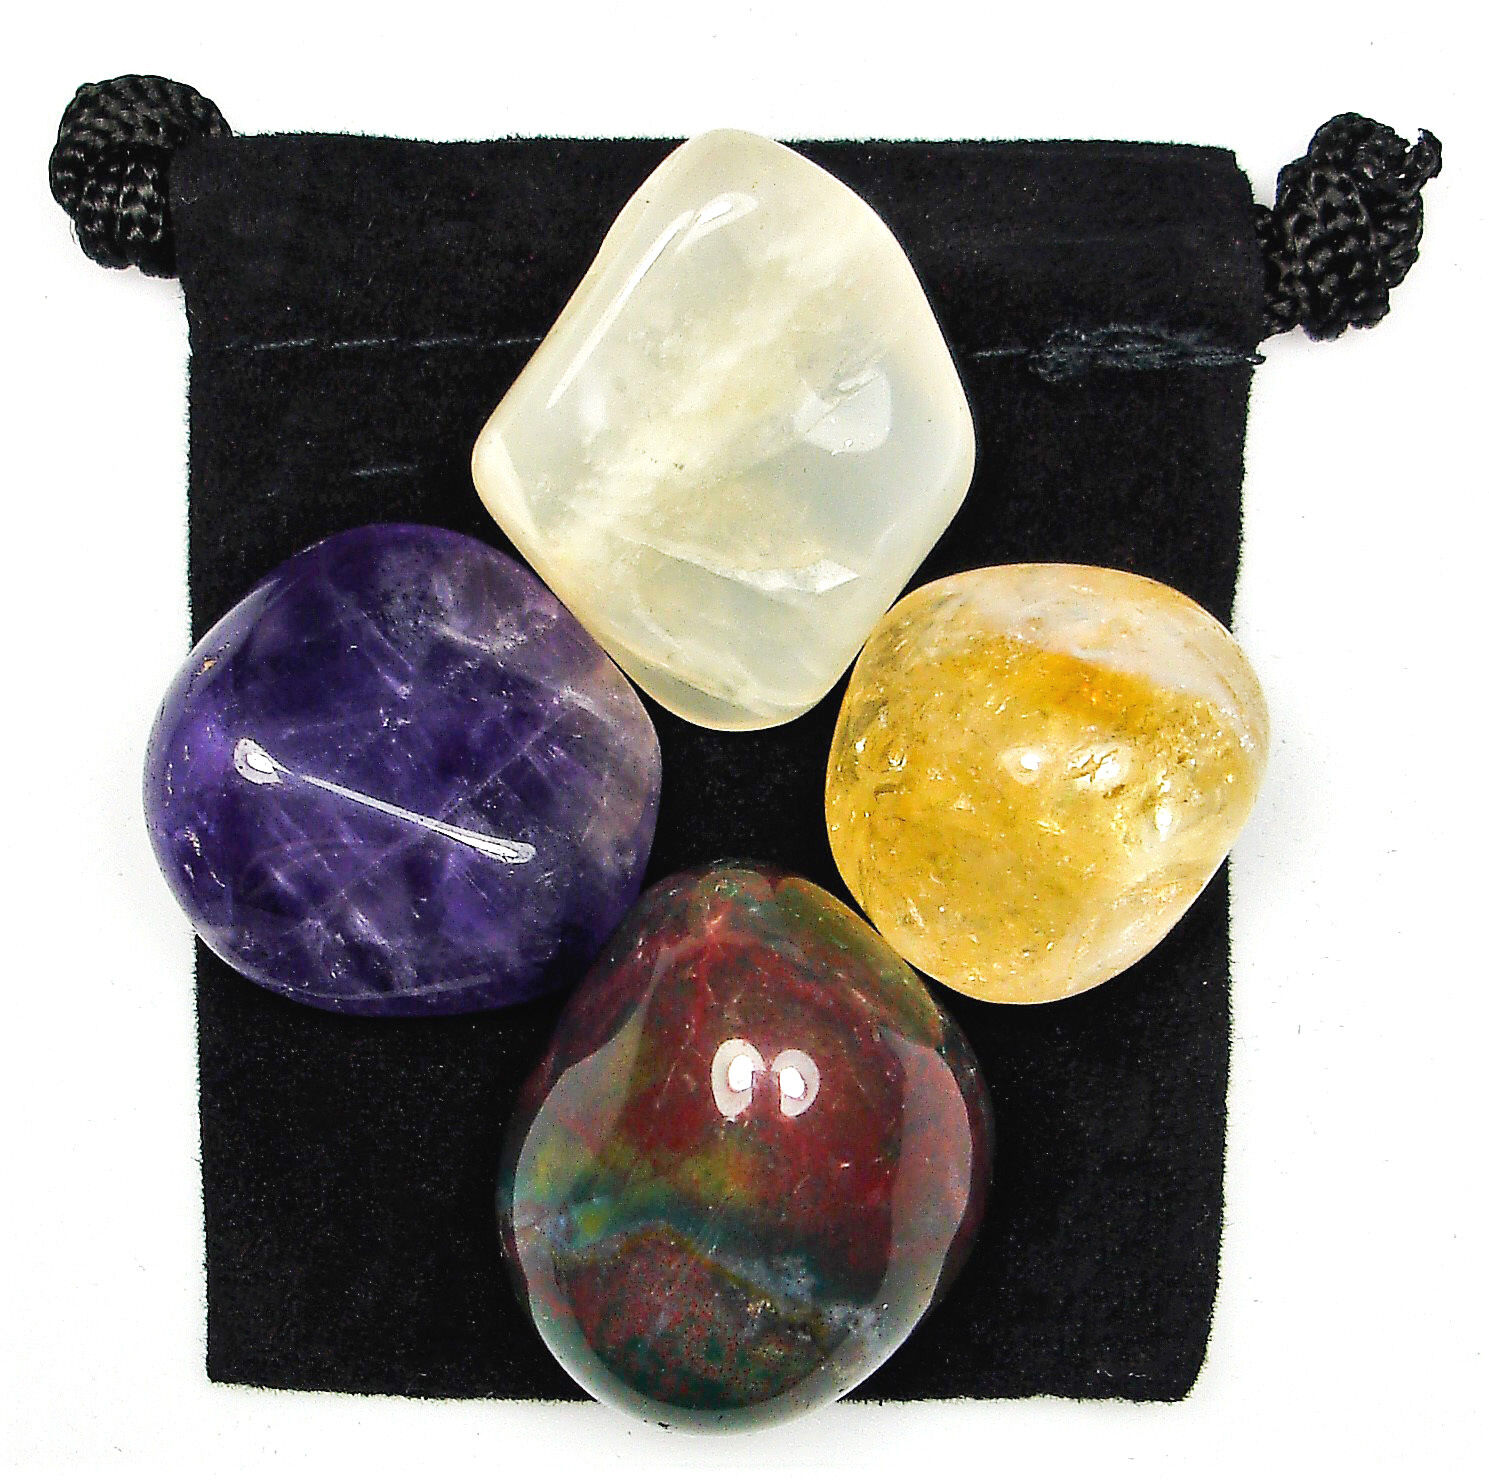 PSYCHIC INTUITION Tumbled Crystal Healing Set = 4 Stones + Pouch + Description